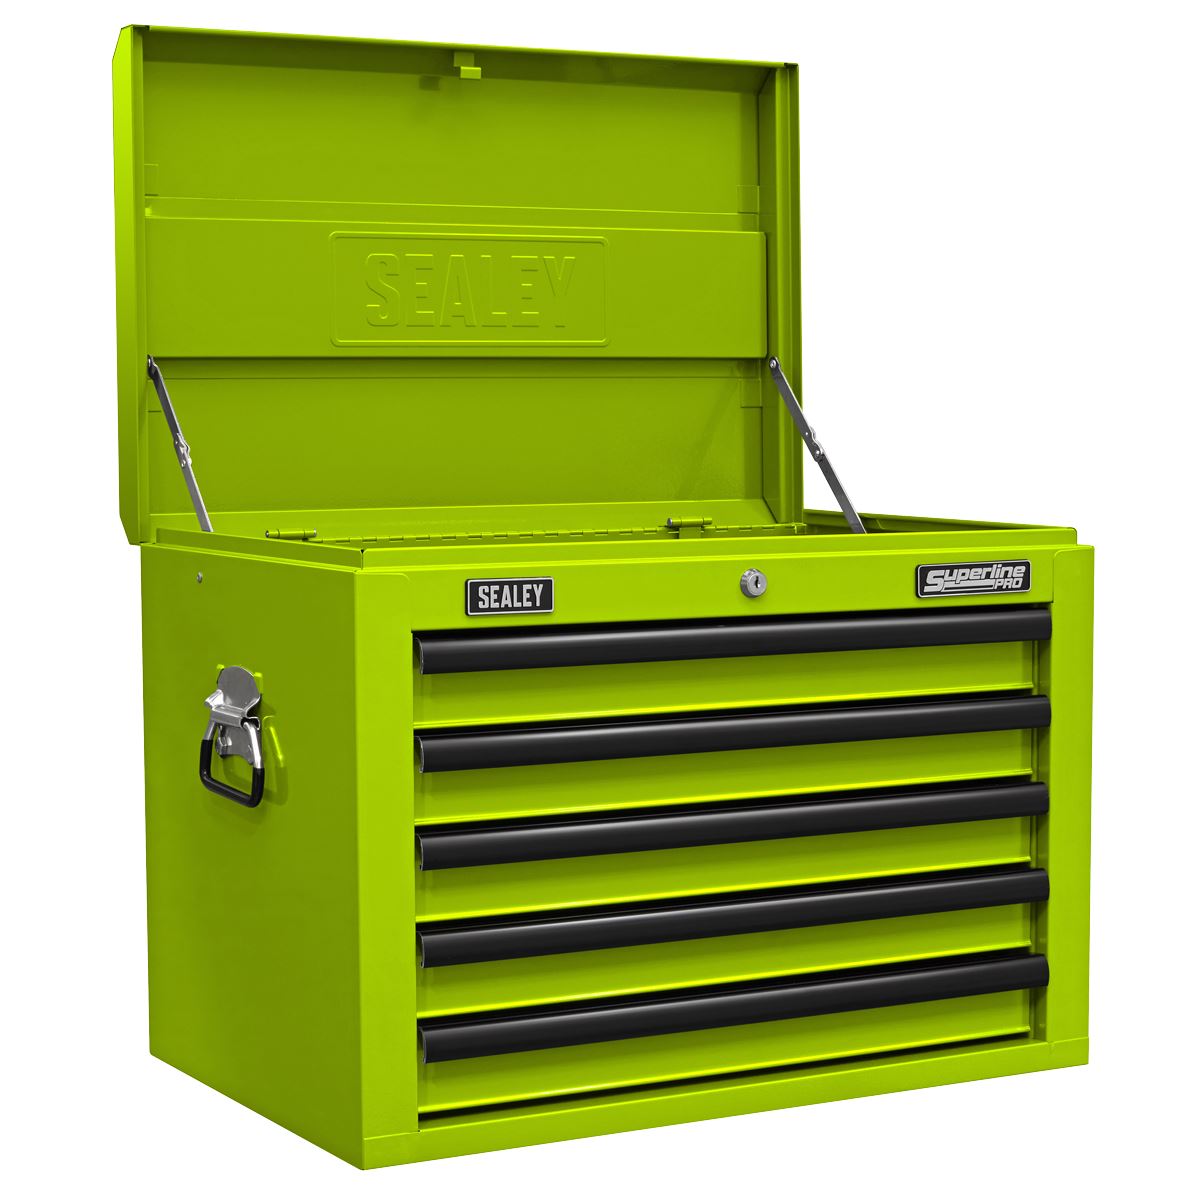 Sealey Superline Pro Topchest 5 Drawer with Ball-Bearing Slides - Green/Black